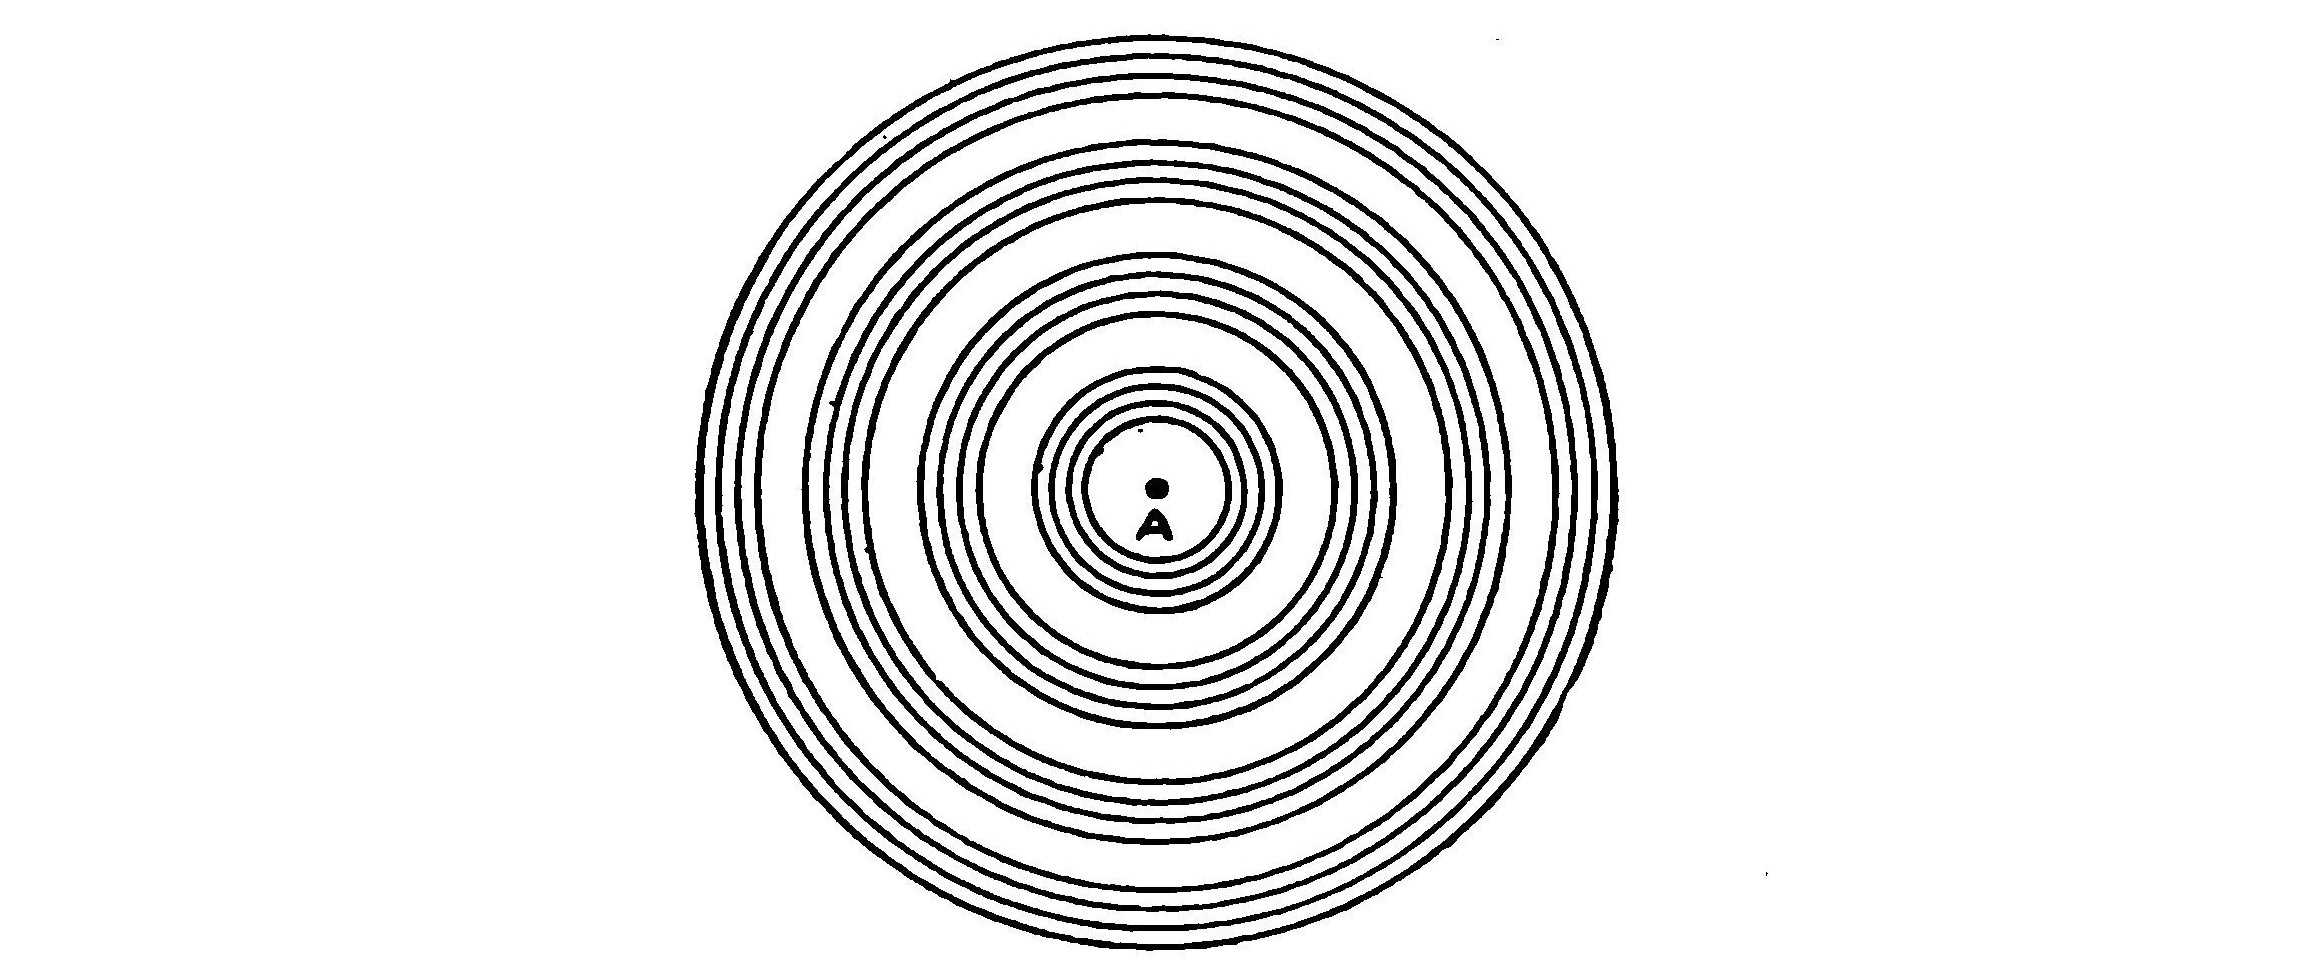 FIG. 9.—Under the same conditions, but when viewed from above, the appearance would be that of a series of concentric circles.